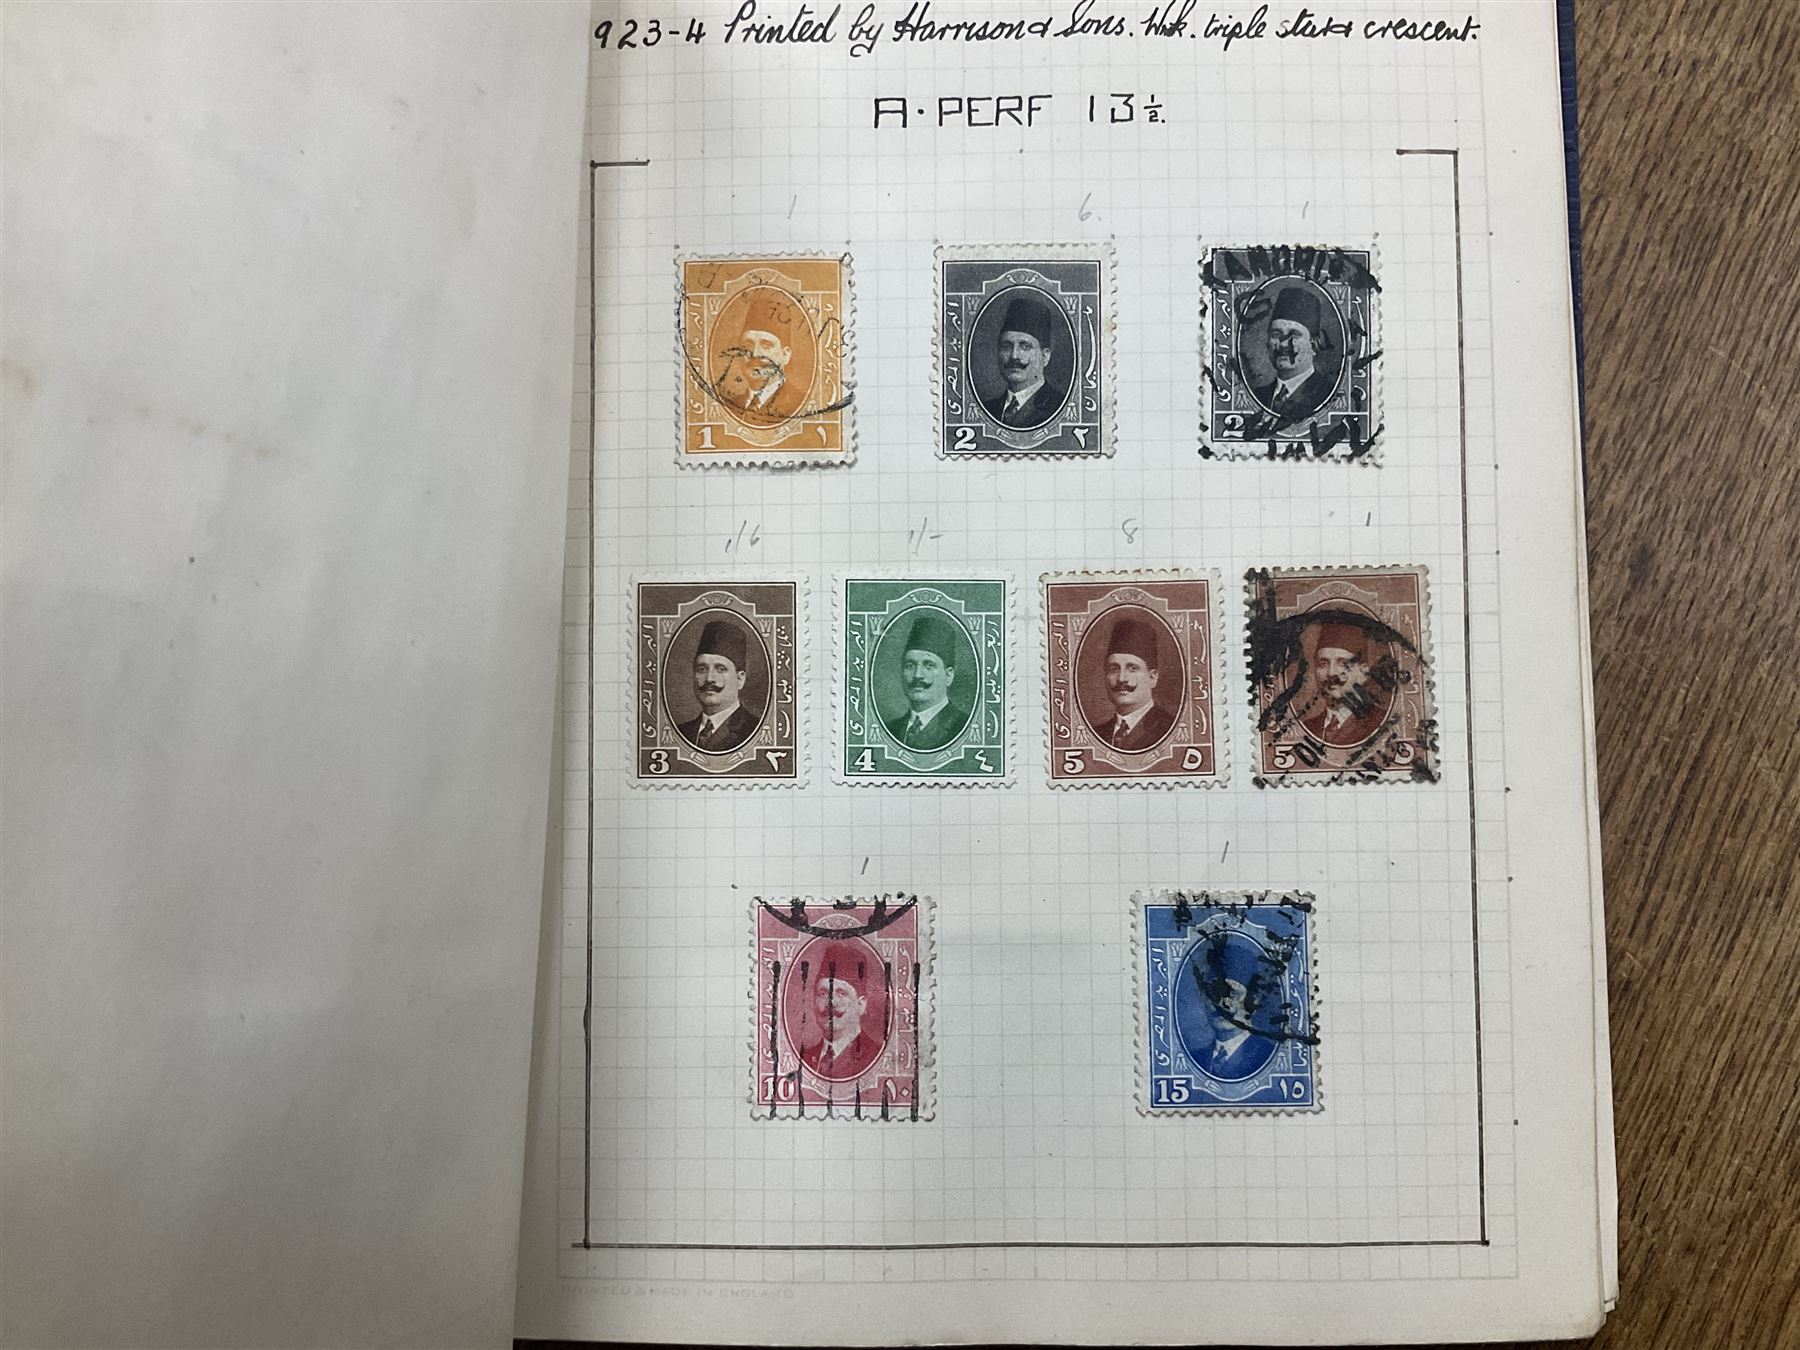 Egypt 1866 and later stamps - Image 647 of 761